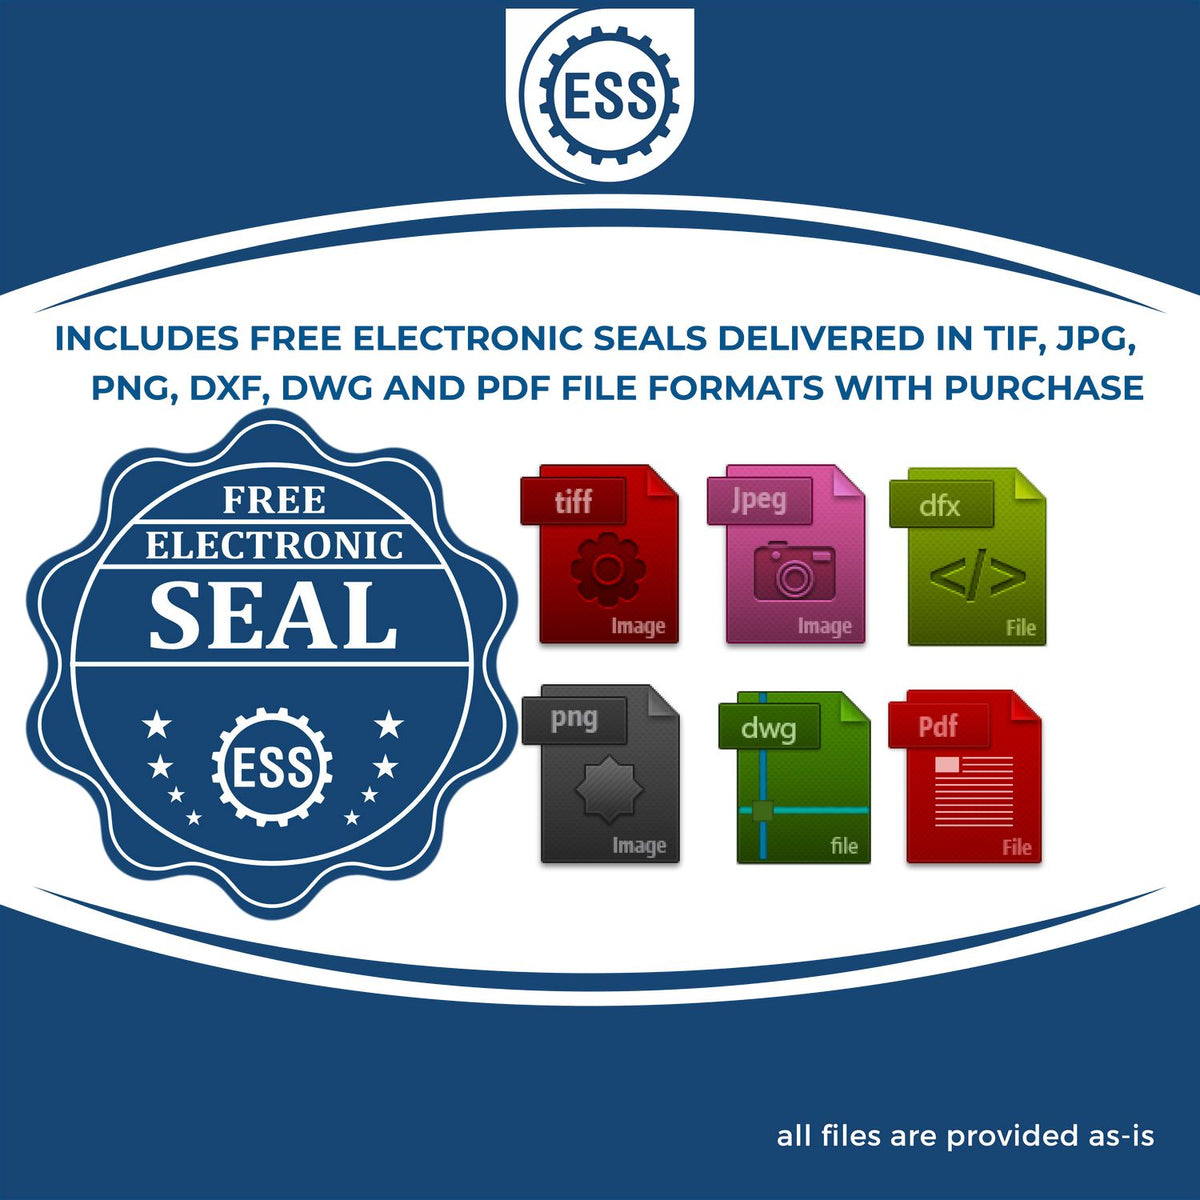 An infographic for the free electronic seal for the Slim Pre-Inked Maine Land Surveyor Seal Stamp illustrating the different file type icons such as DXF, DWG, TIF, JPG and PNG.